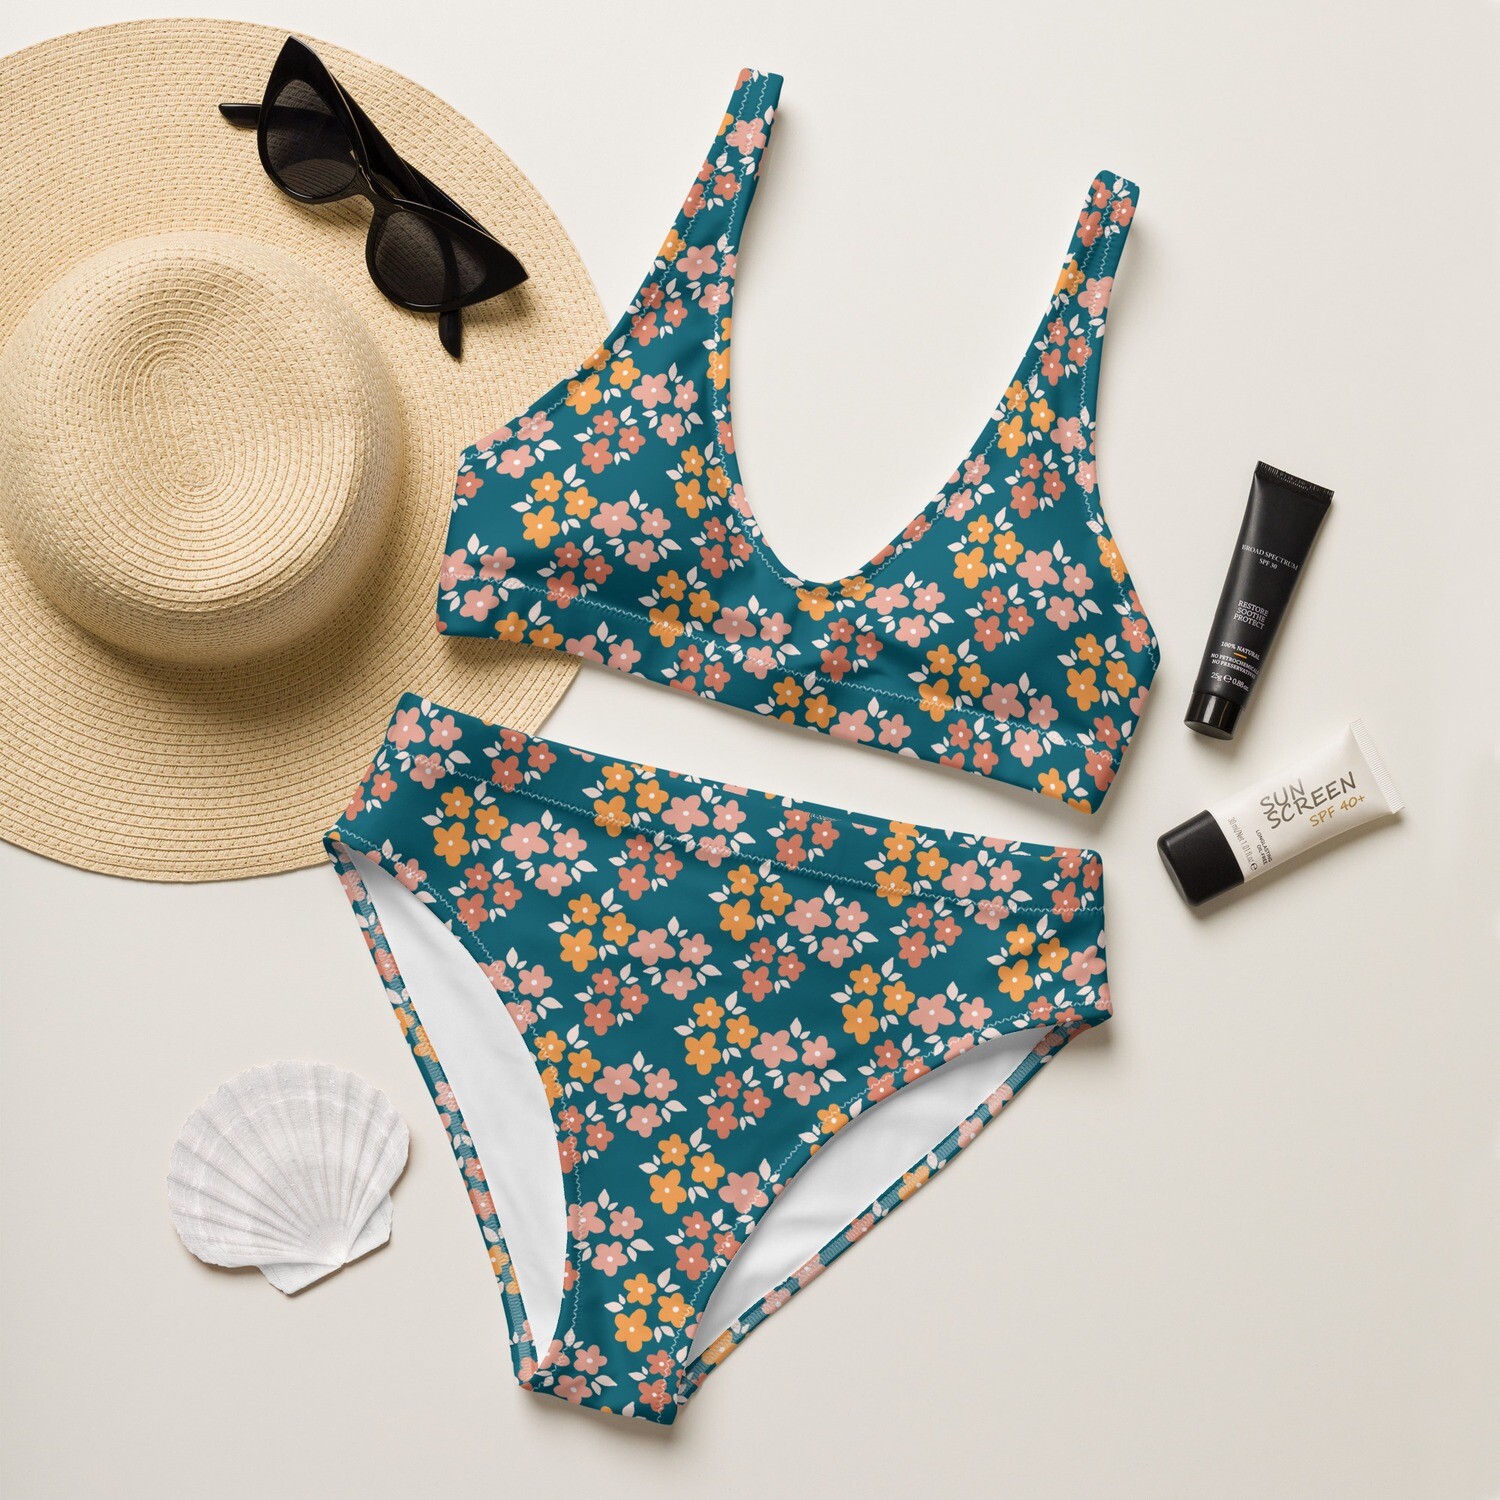 Dark retro turquoise recycled high-waisted bikini set with retro floral pattern in sizes XS-3XL